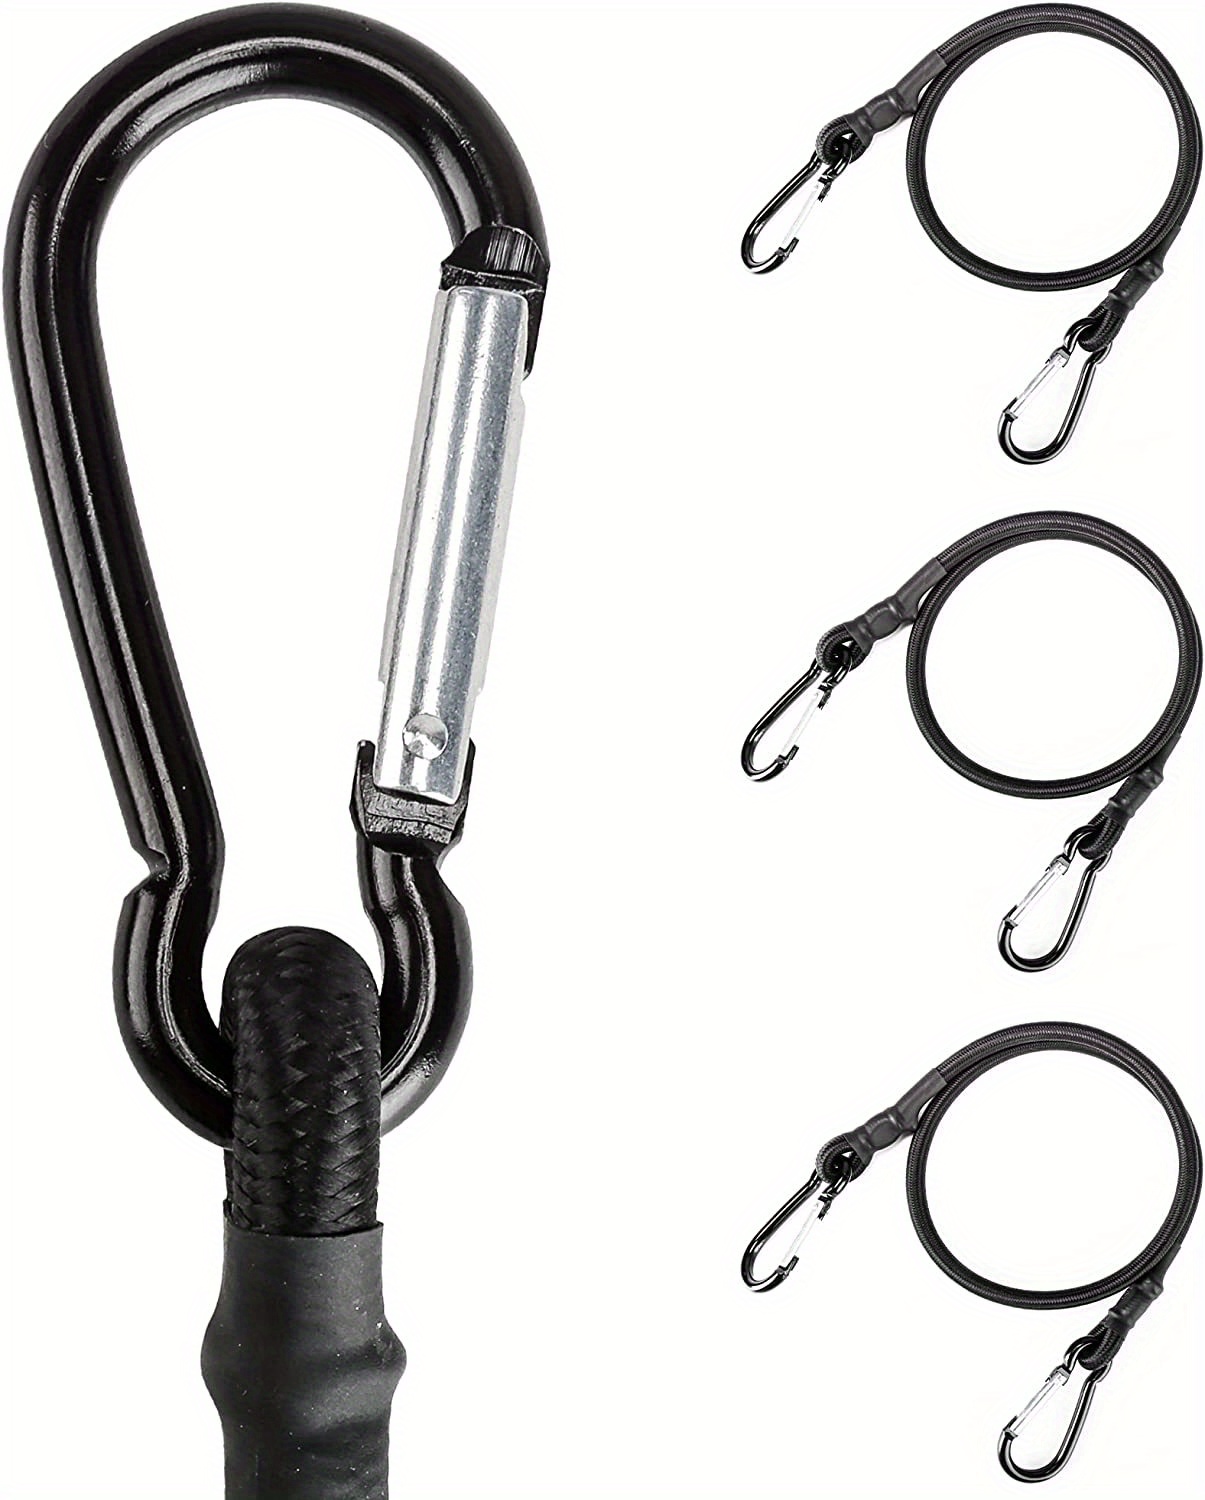 Bungee Cords with Carabiner, 12 Inch Long Heavy Duty Bungee Cords